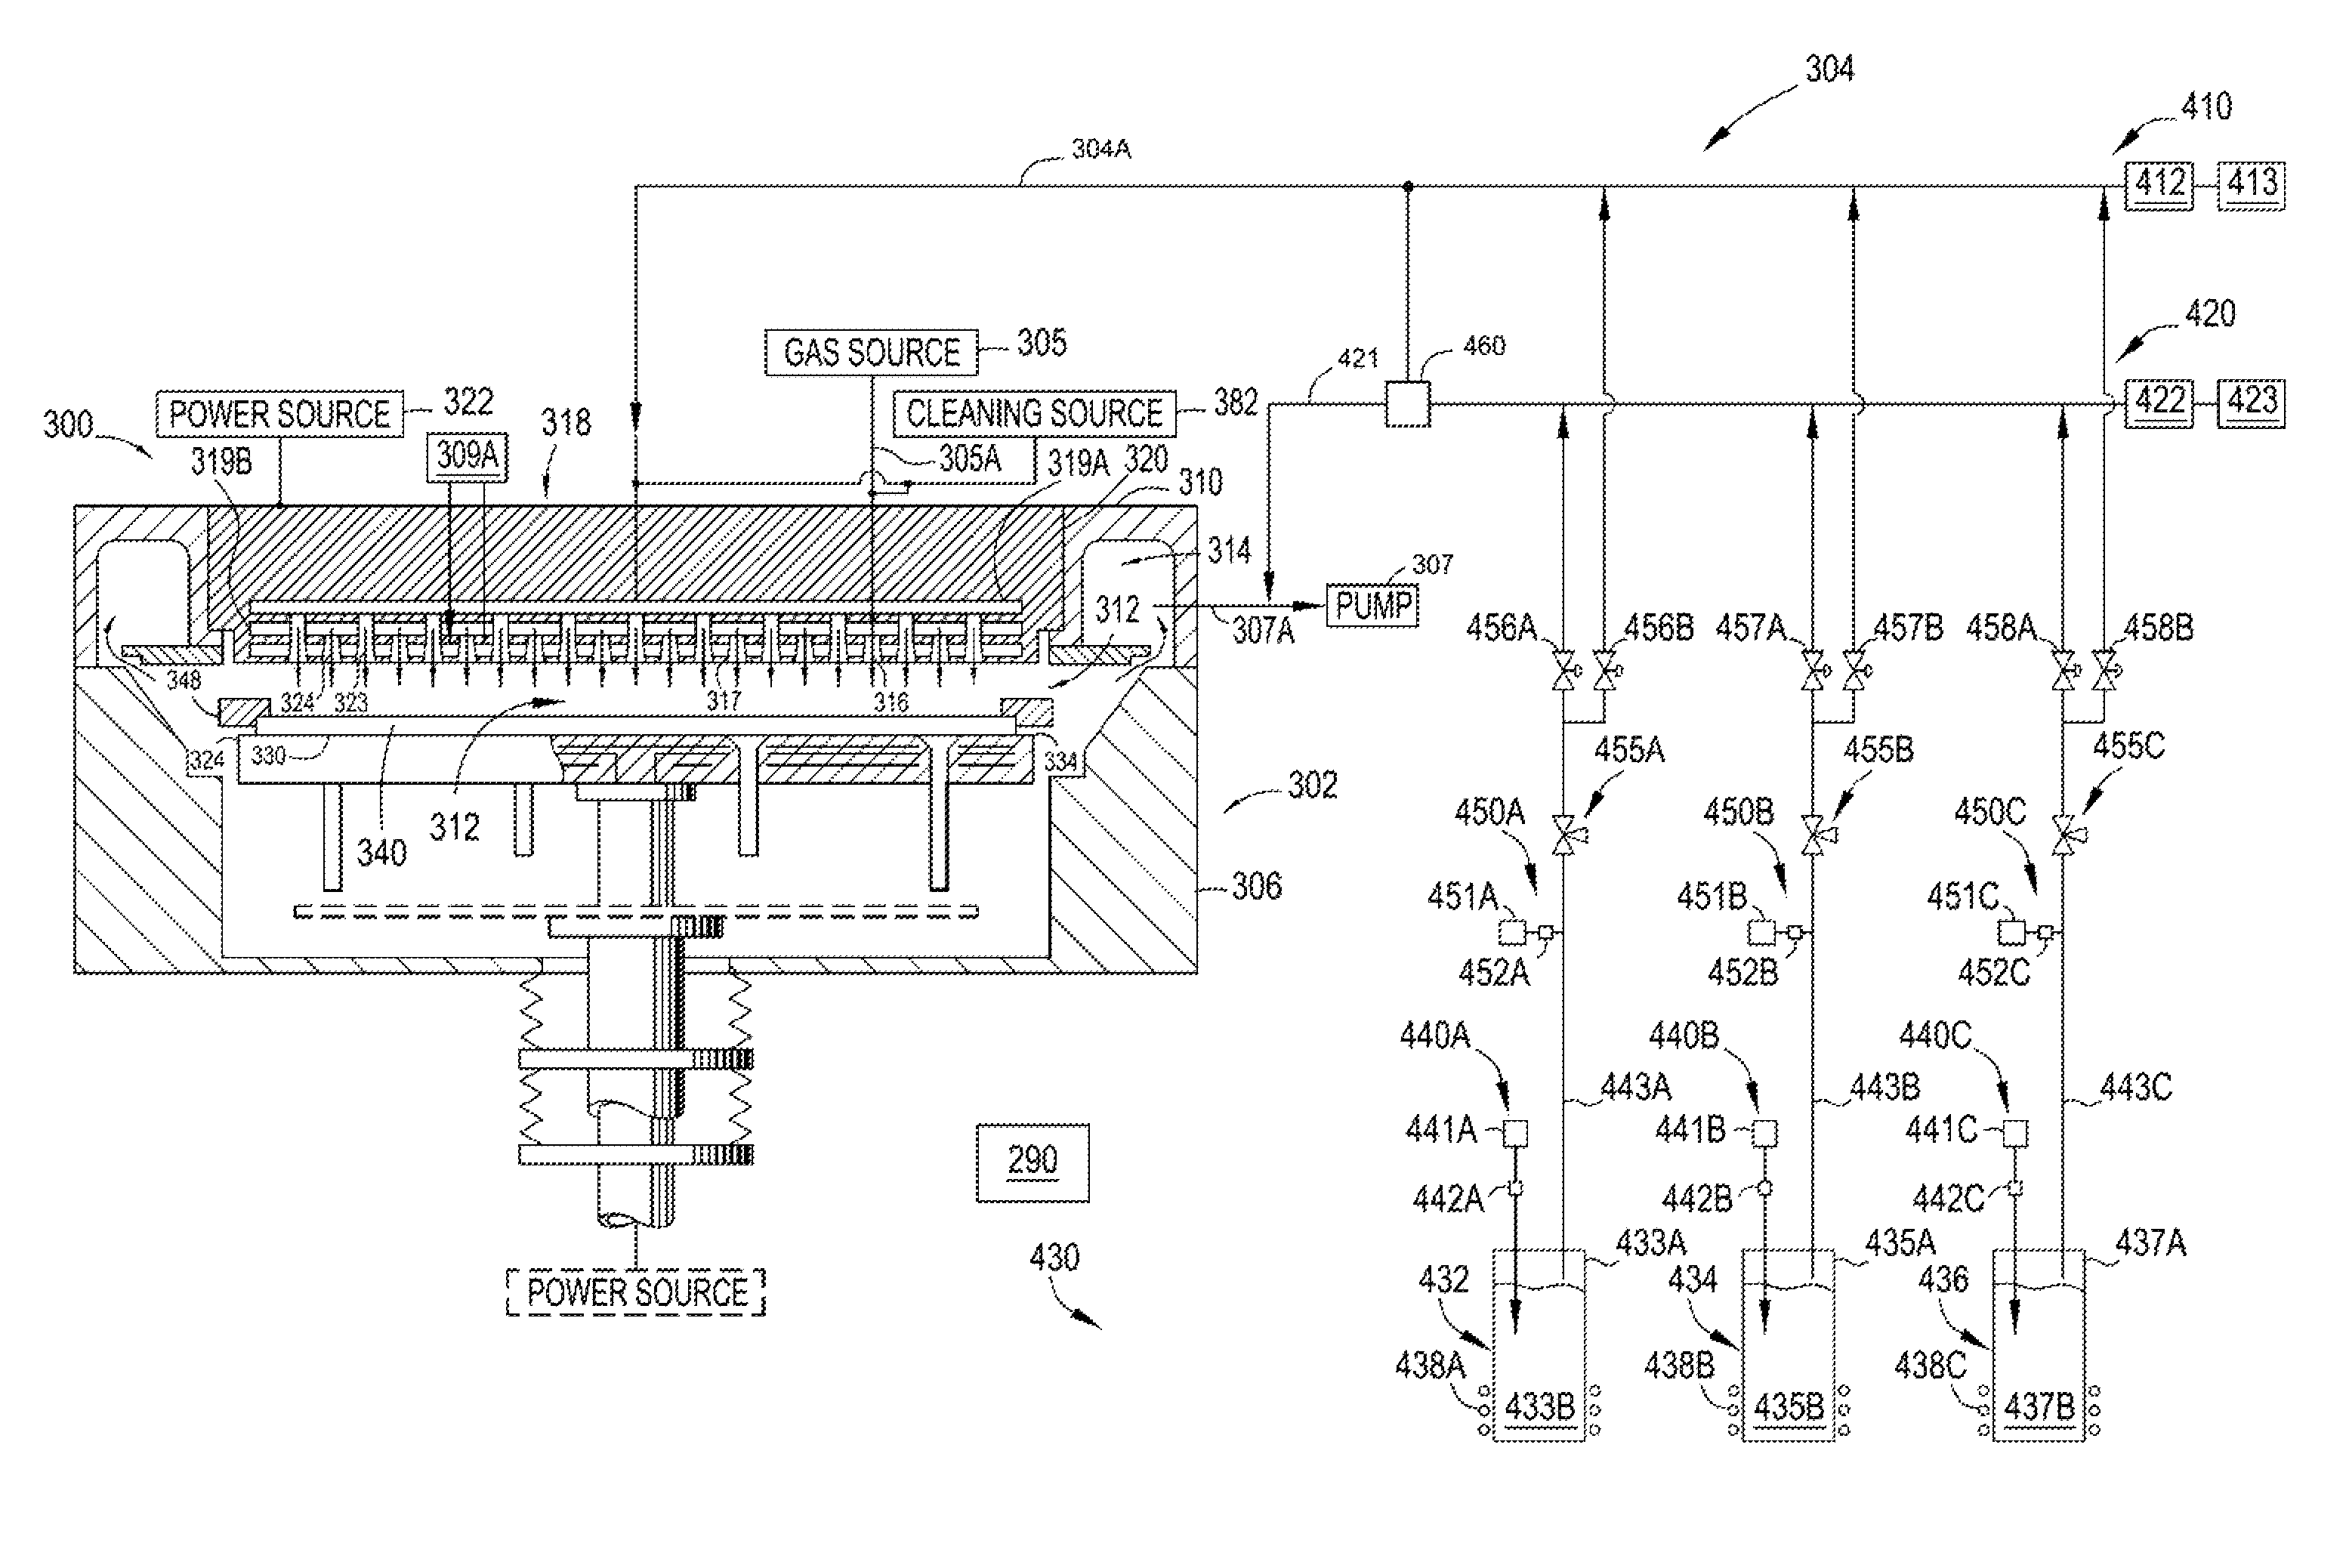 Apparatus and method of forming an indium gallium zinc oxide layer